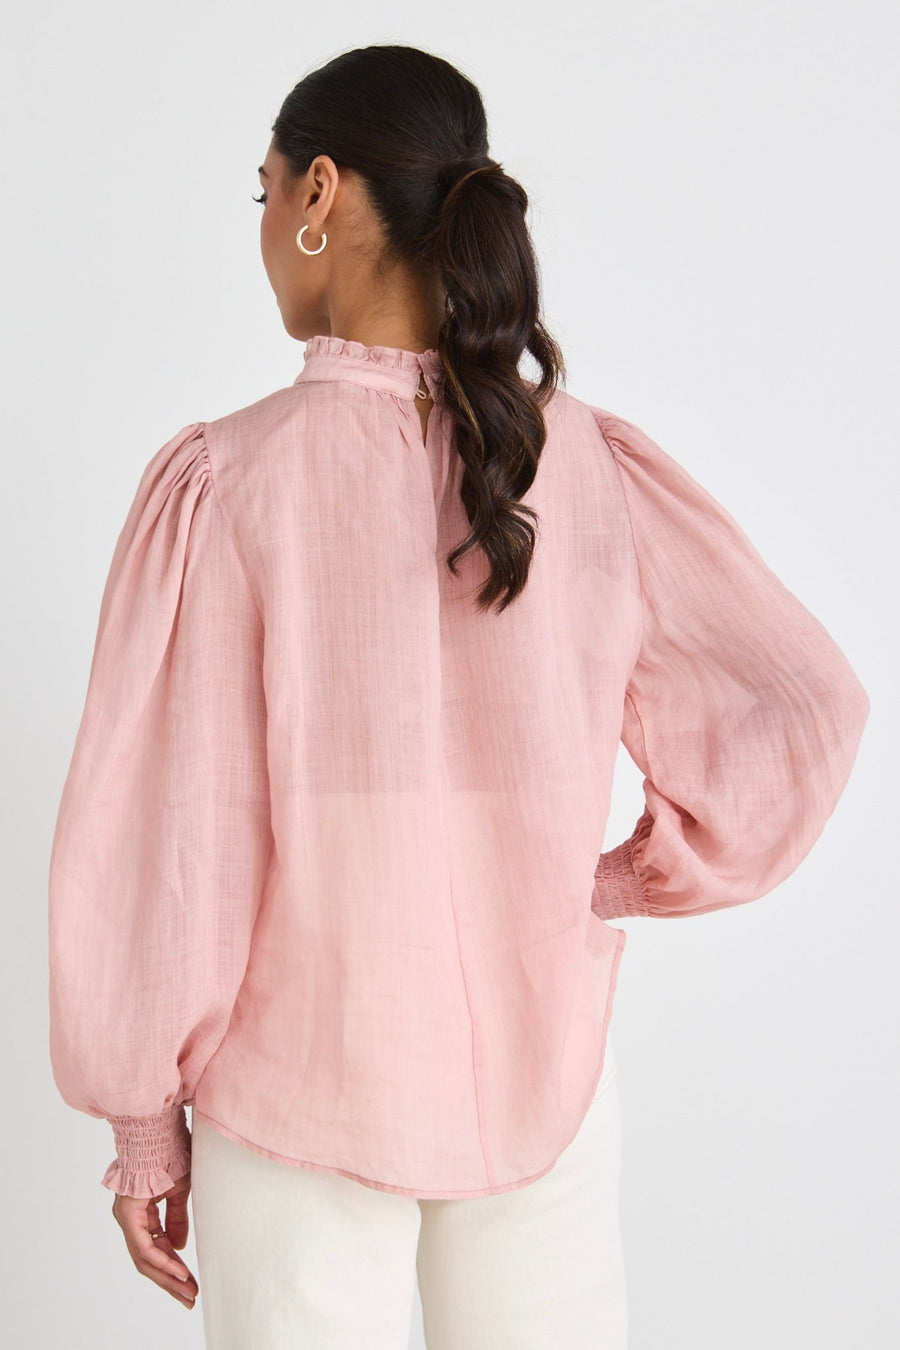 BY ROSA POET BLUSH SEMI SHEER HIGH NECK RELAXED TOP - BLUSH - WILDROSE